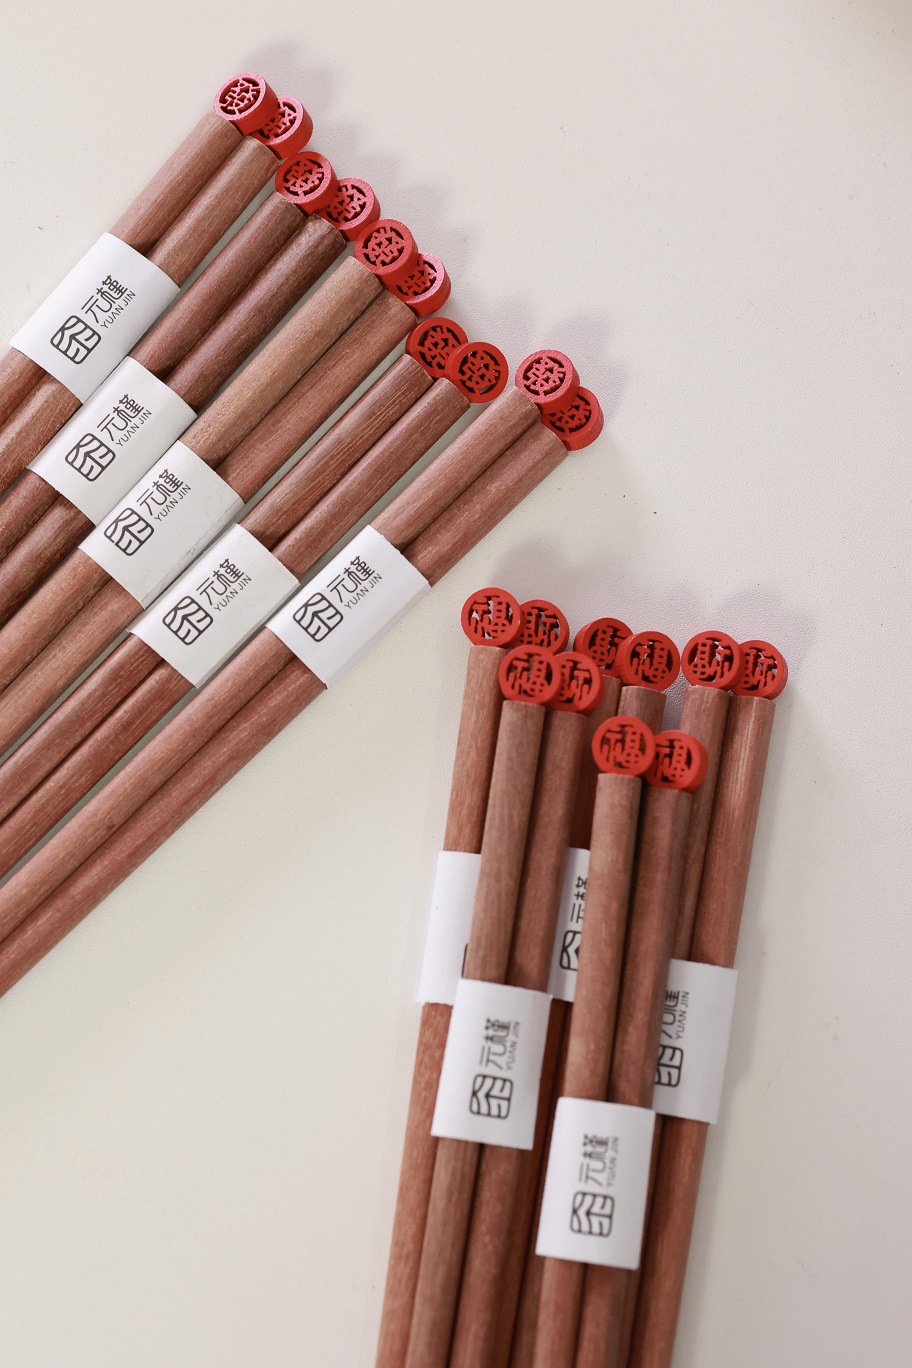 [Yuanjin Bamboo Wood] Home Festival Gift Reusable Chopstick Red Sandal Wood Chopsticks Non-Slip Natural High-End High Temperature Resistant